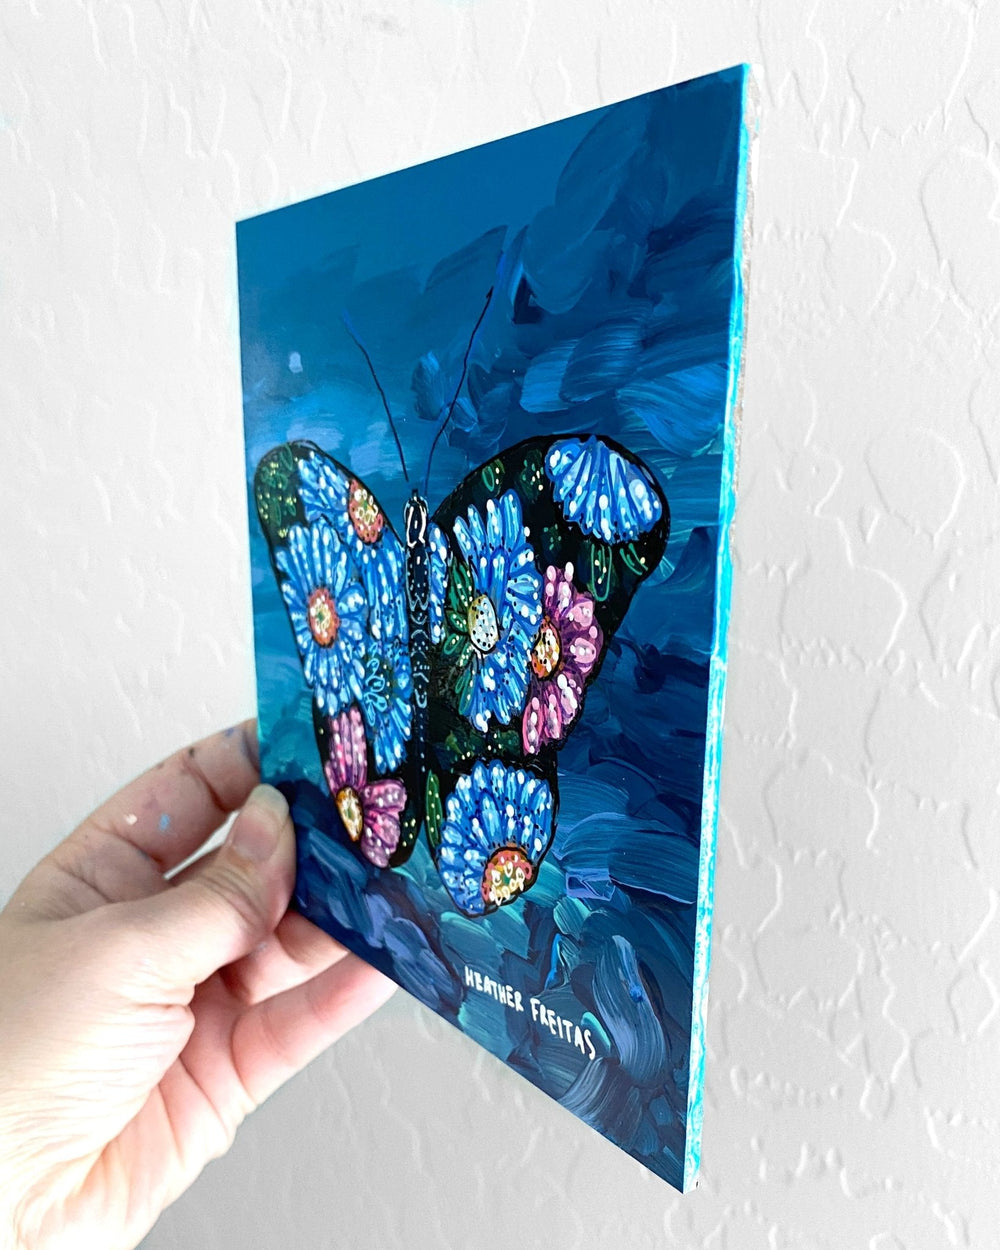 Floral Storm Butterfly - Heather Freitas 